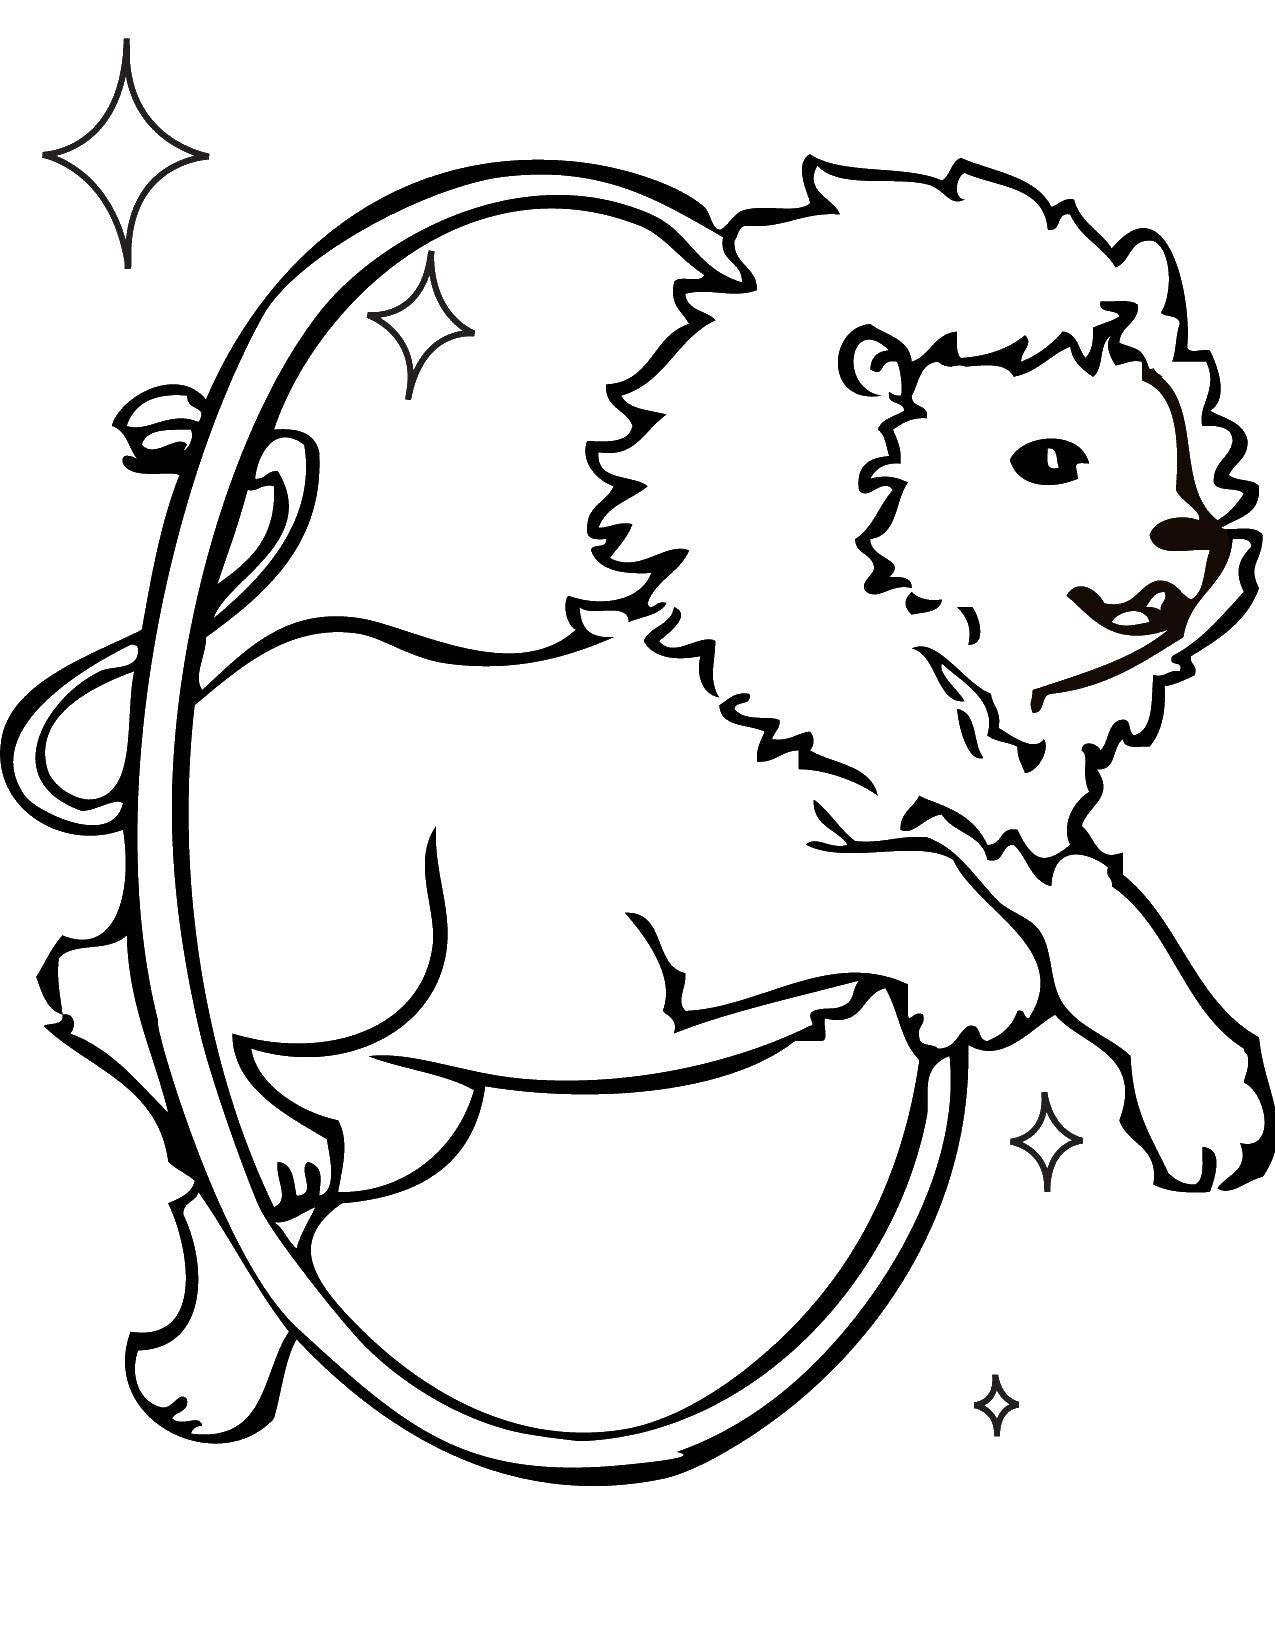 Coloring Lion priget through the Hoop. Category Animals. Tags:  animals, lions.